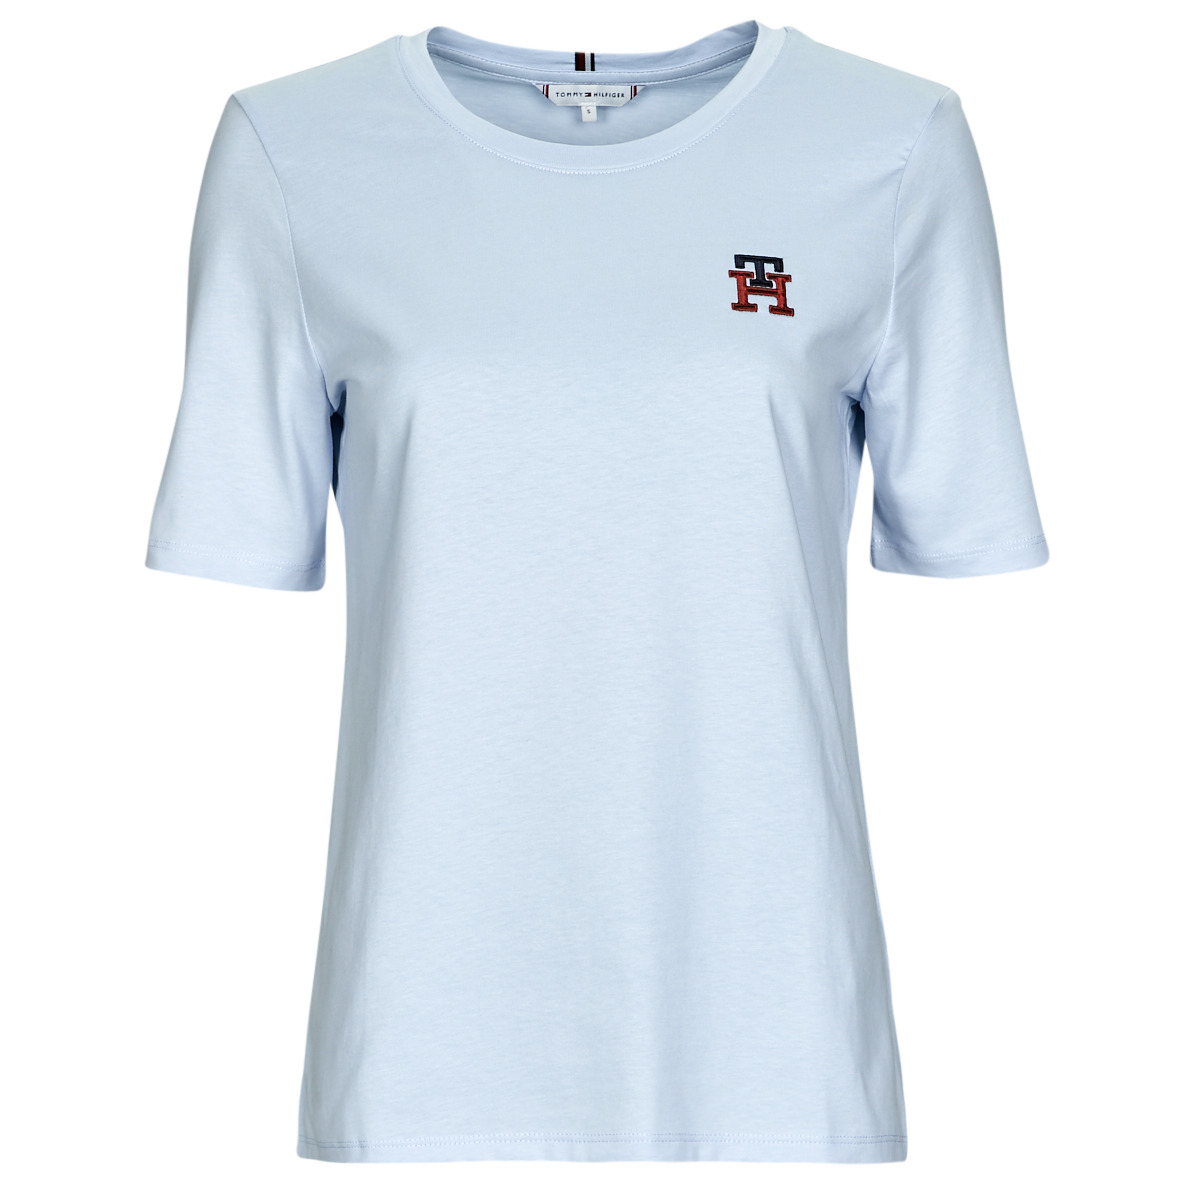 | Sky 44,00 / MONOGRAM - Spartoo € SS - short-sleeved EMB Clothing delivery C-NK REG Tommy ! Women Hilfiger Europe Fast Blue t-shirts